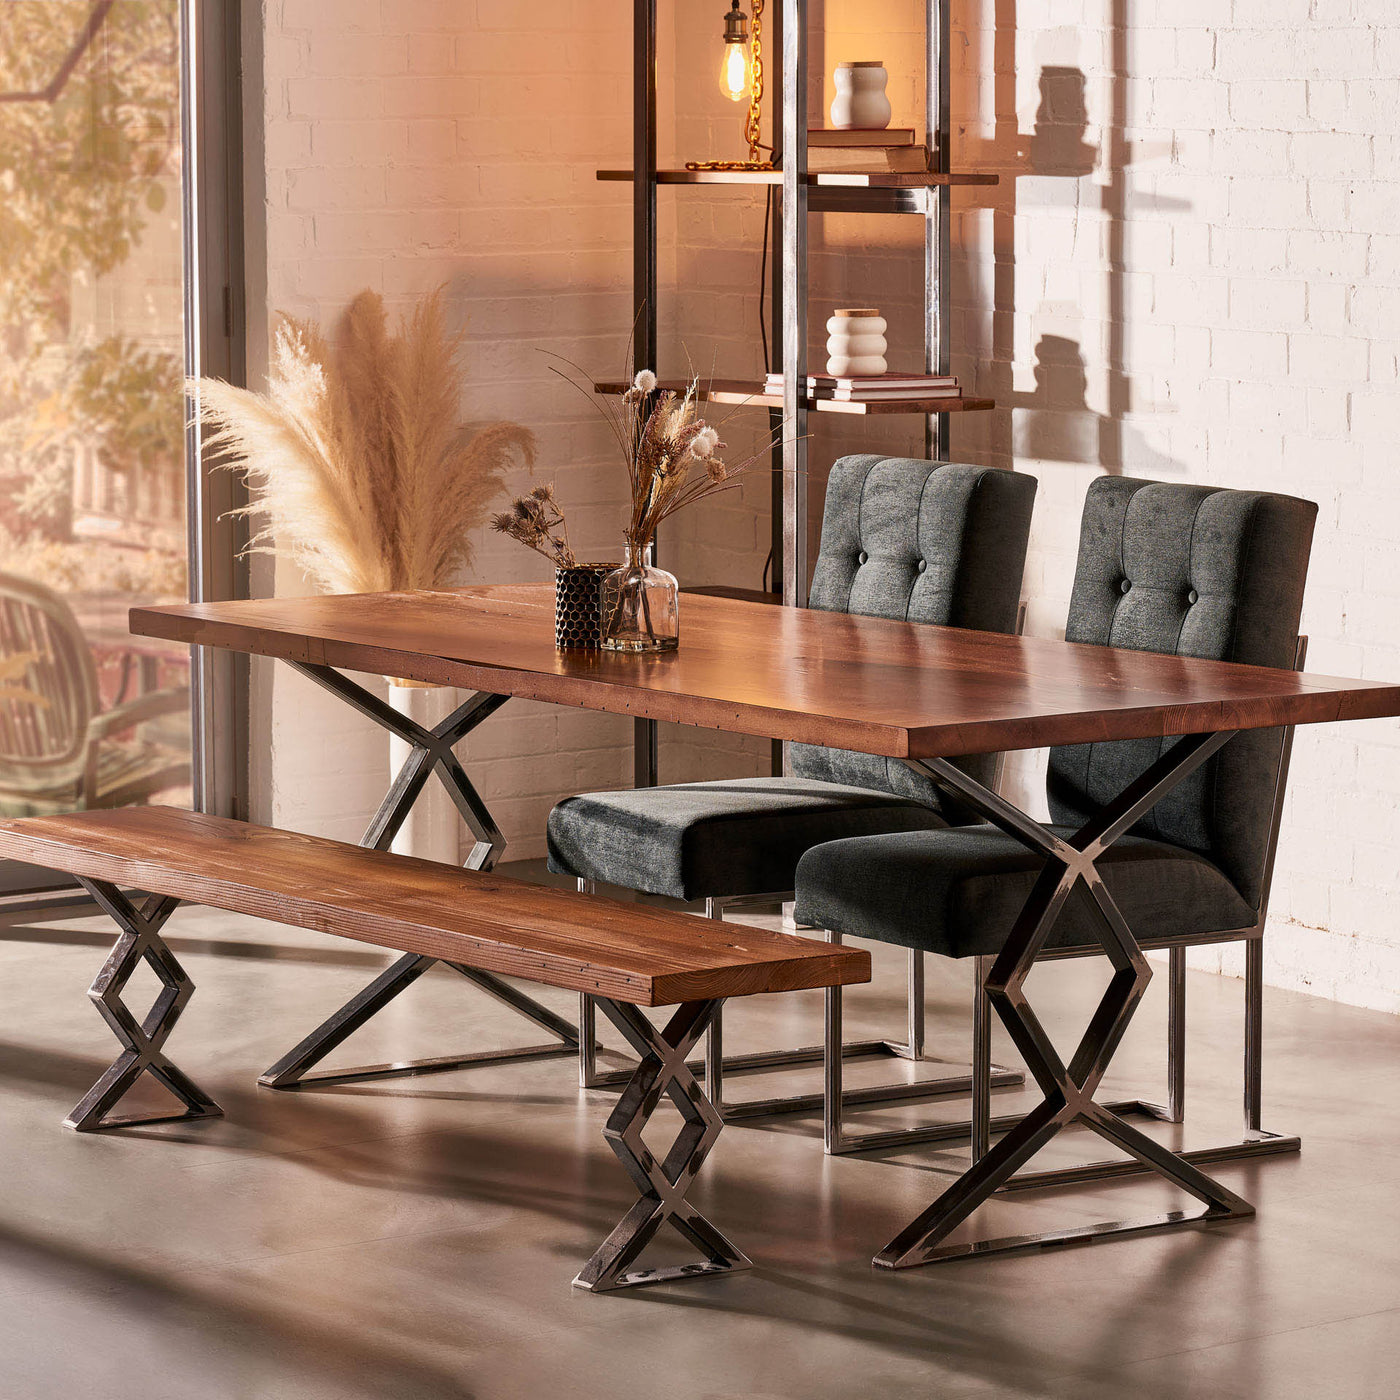 Handcrafted Farmhouse Dining Table with Salvaged Wood and Aesthetic Steel Legs in Diamond Pattern